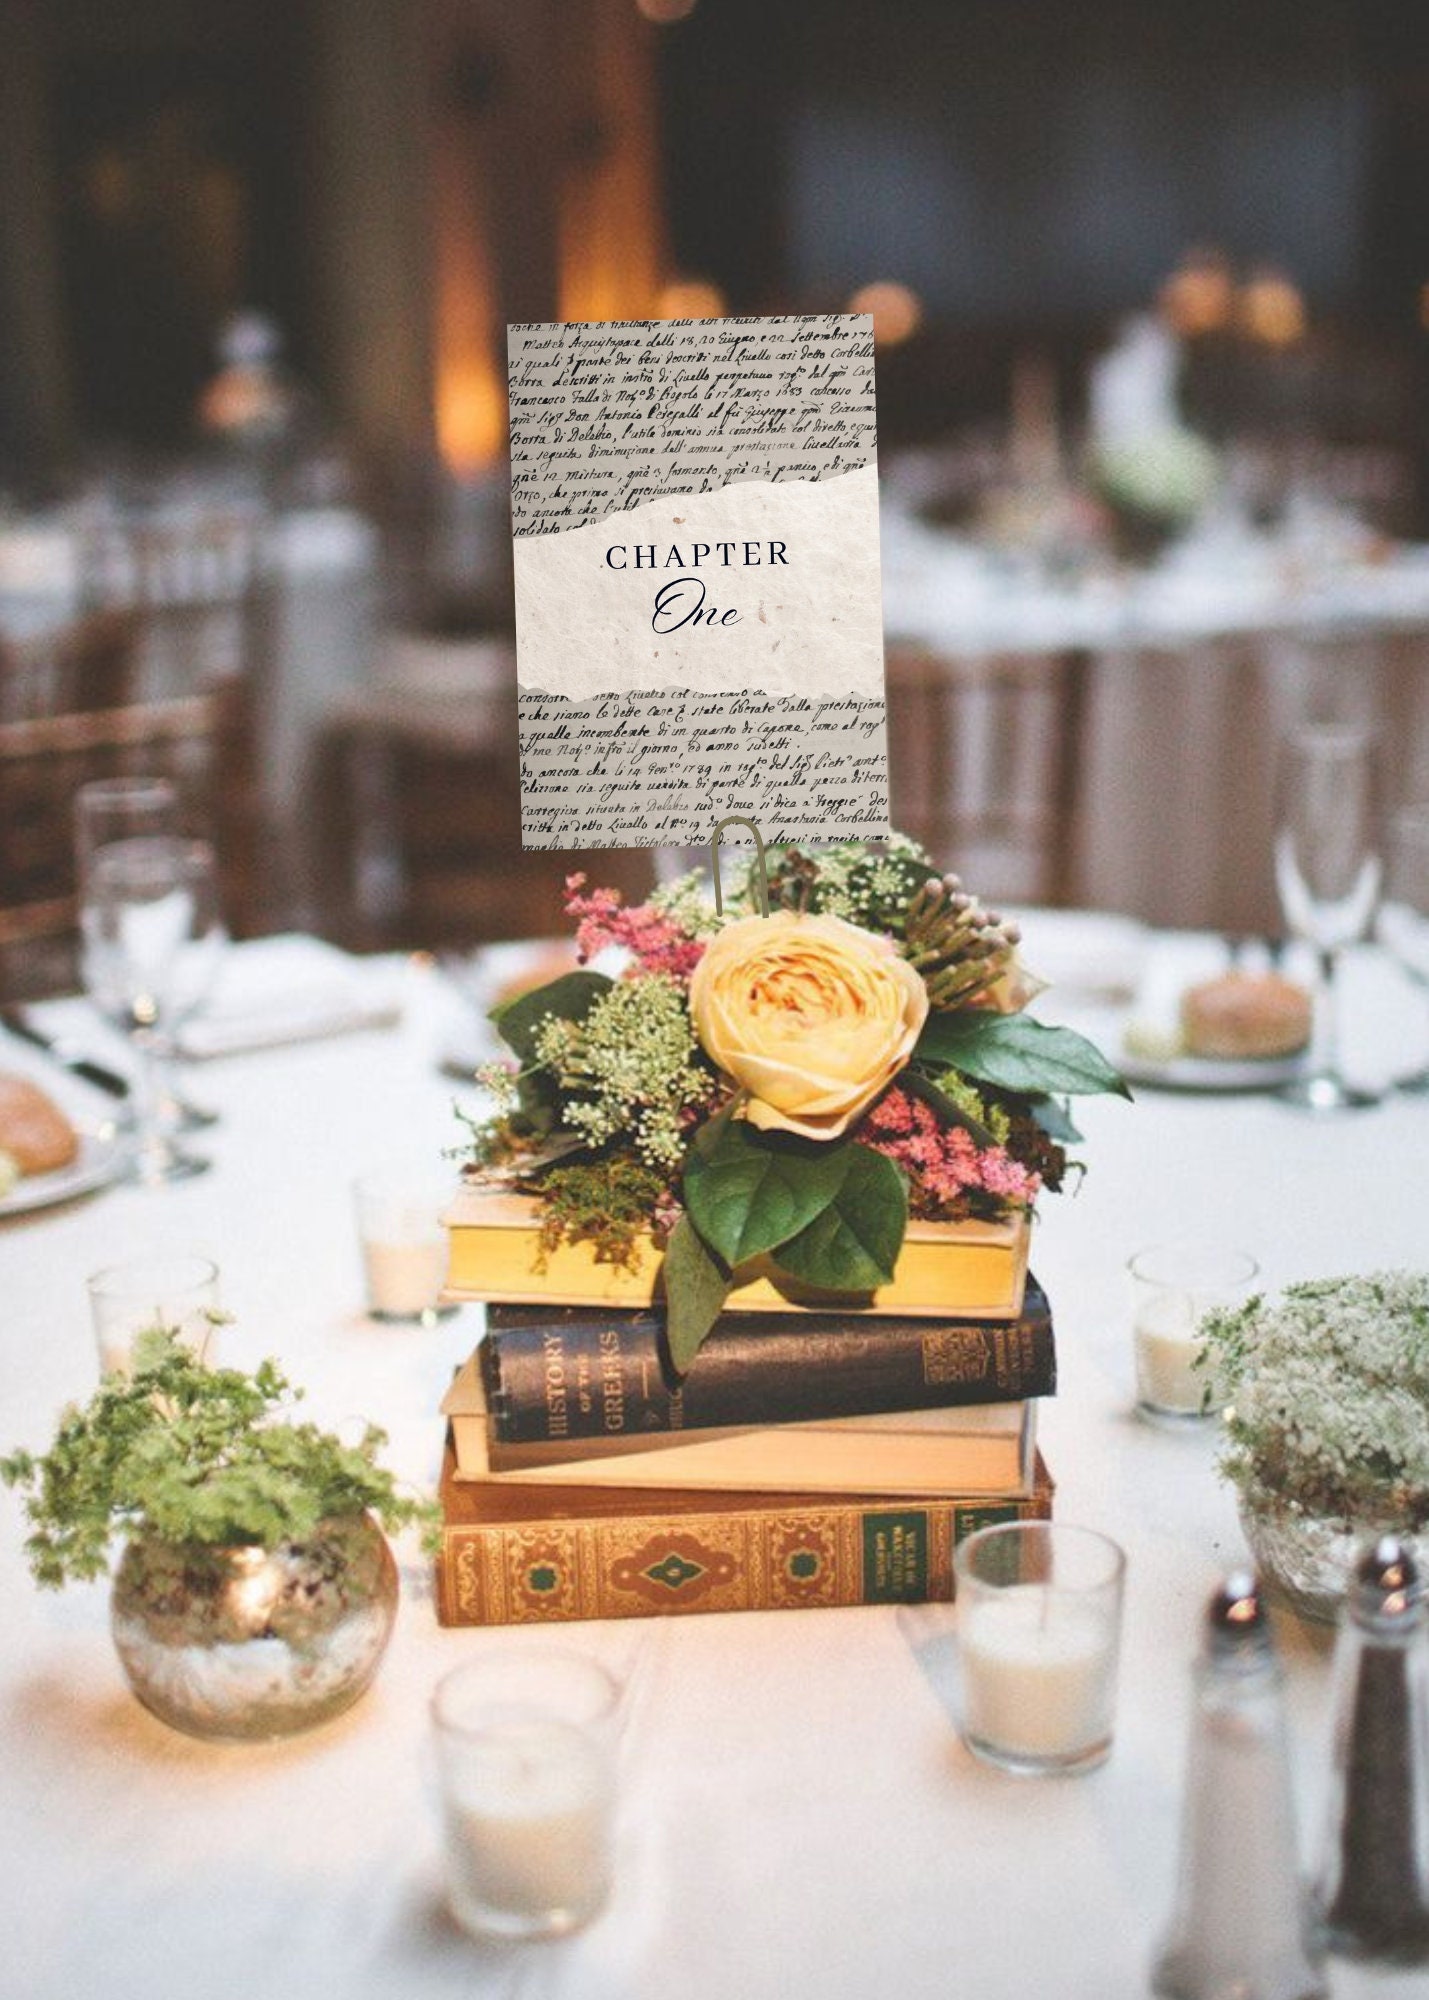 wedding centerpieces with books and pearls  Vintage wedding centerpieces,  Vintage wedding centerpieces diy, Vintage wedding decorations